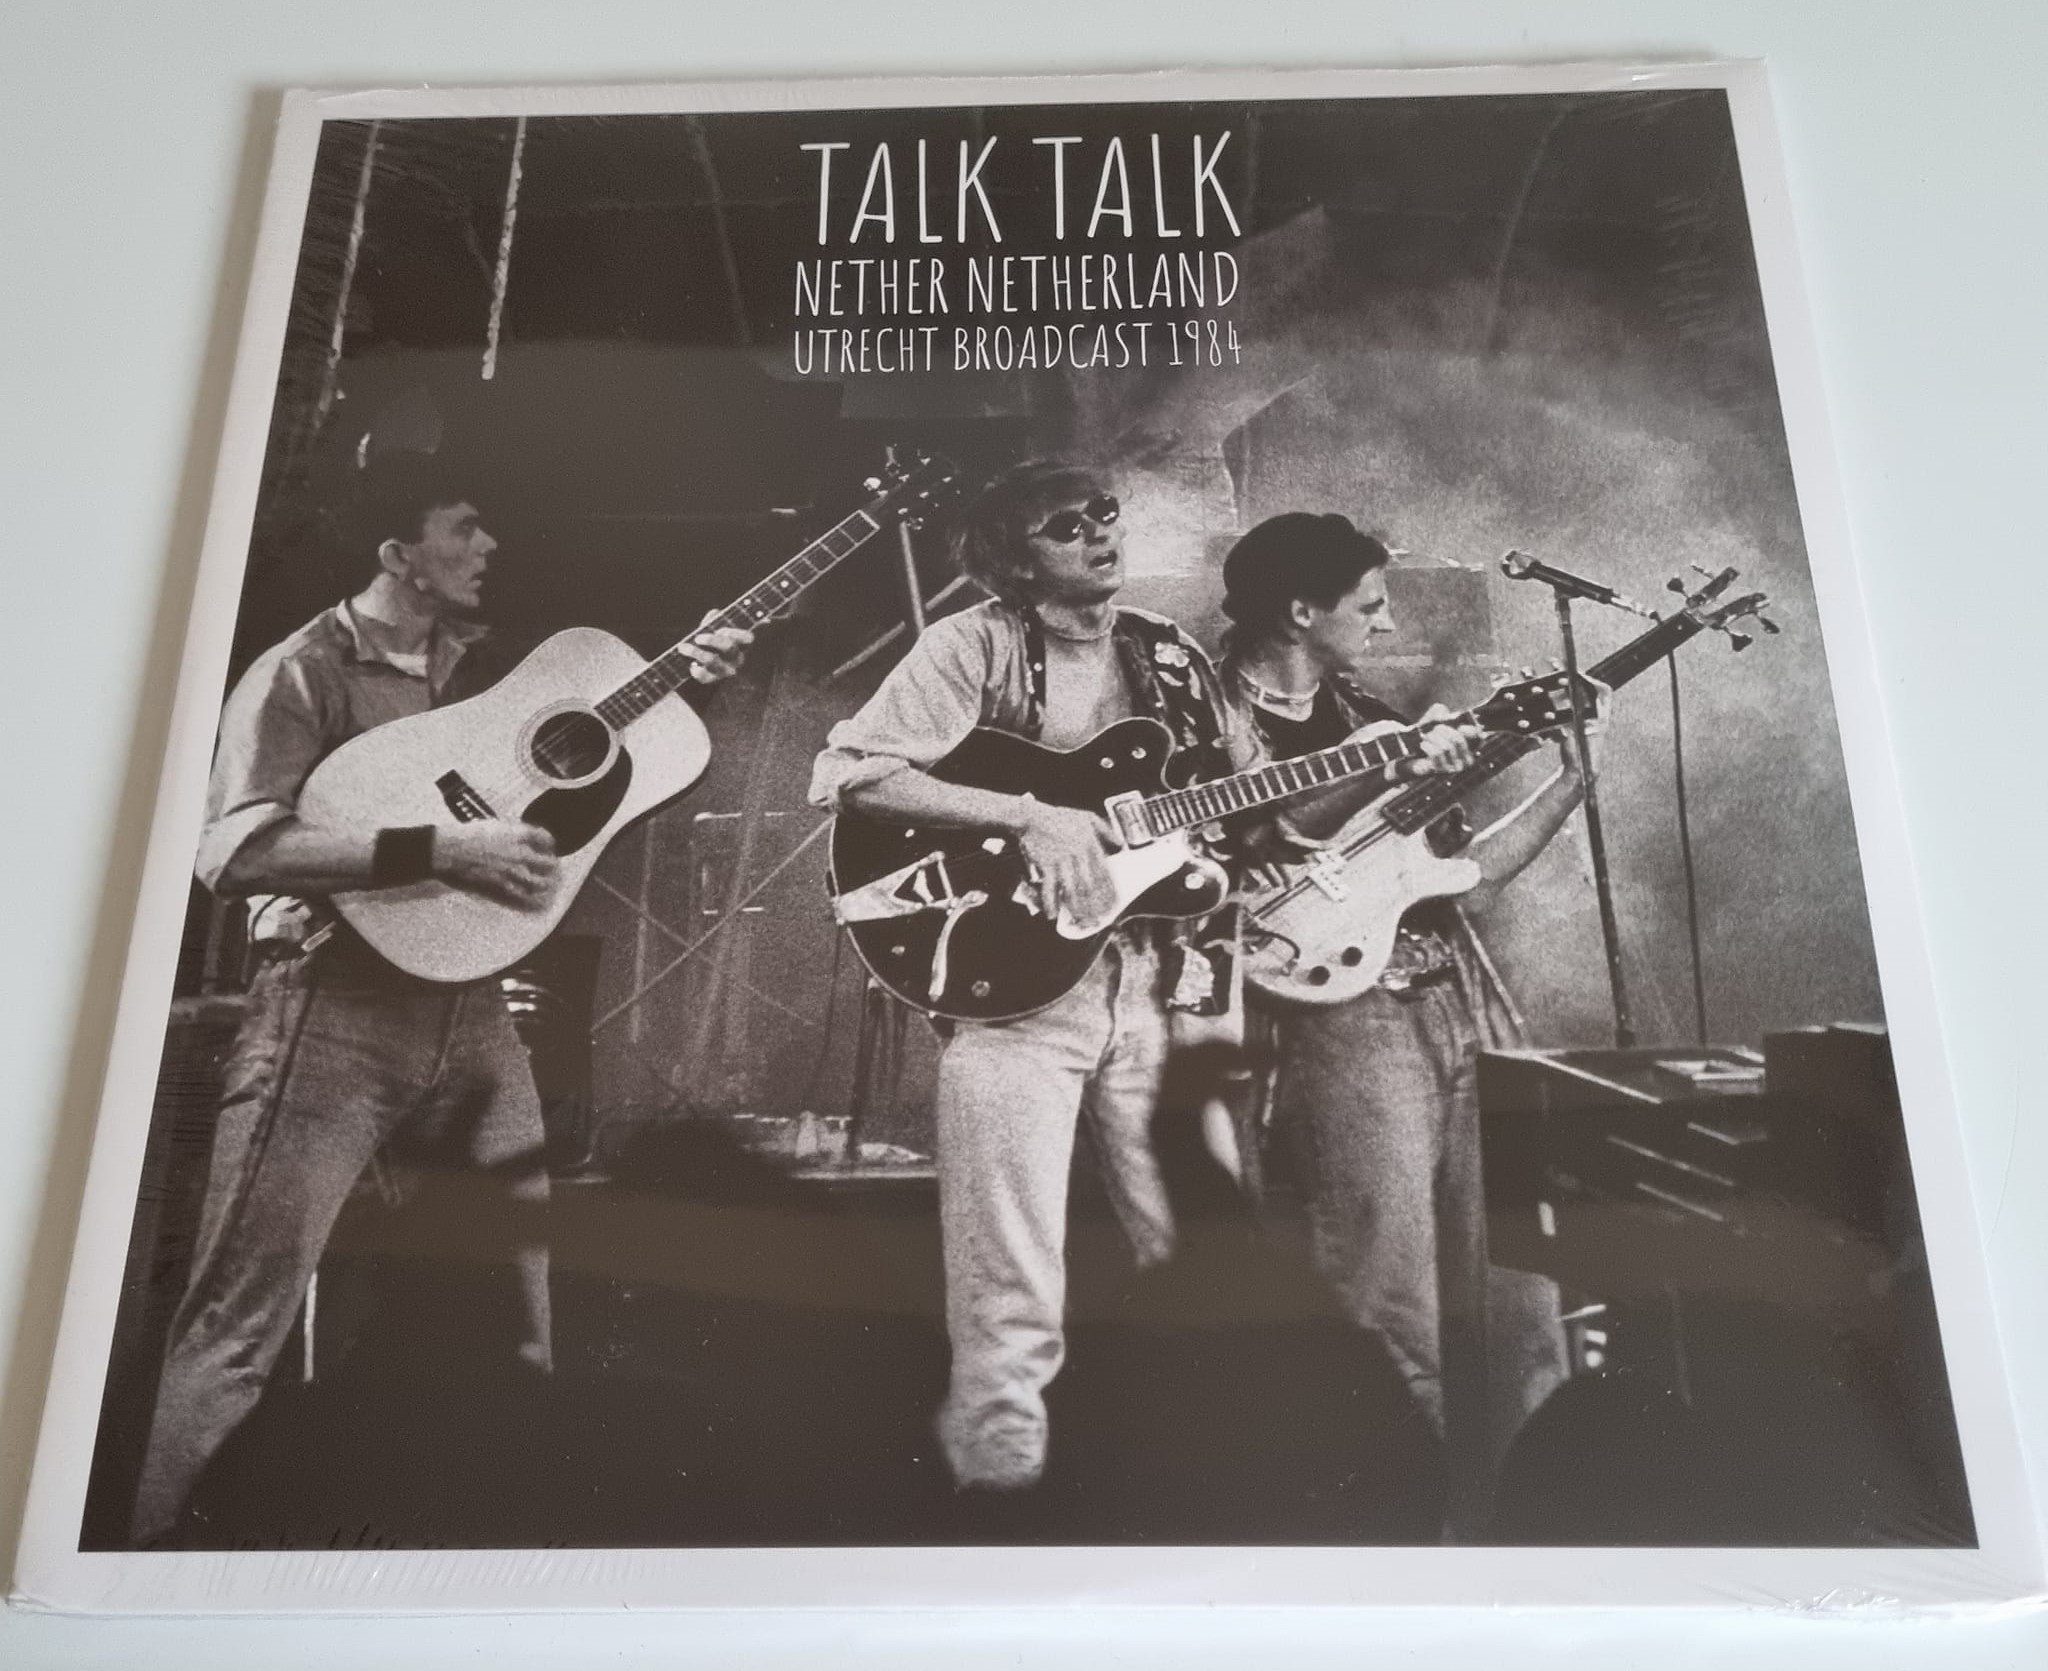 Buy this rare Talk Talk record by clicking here